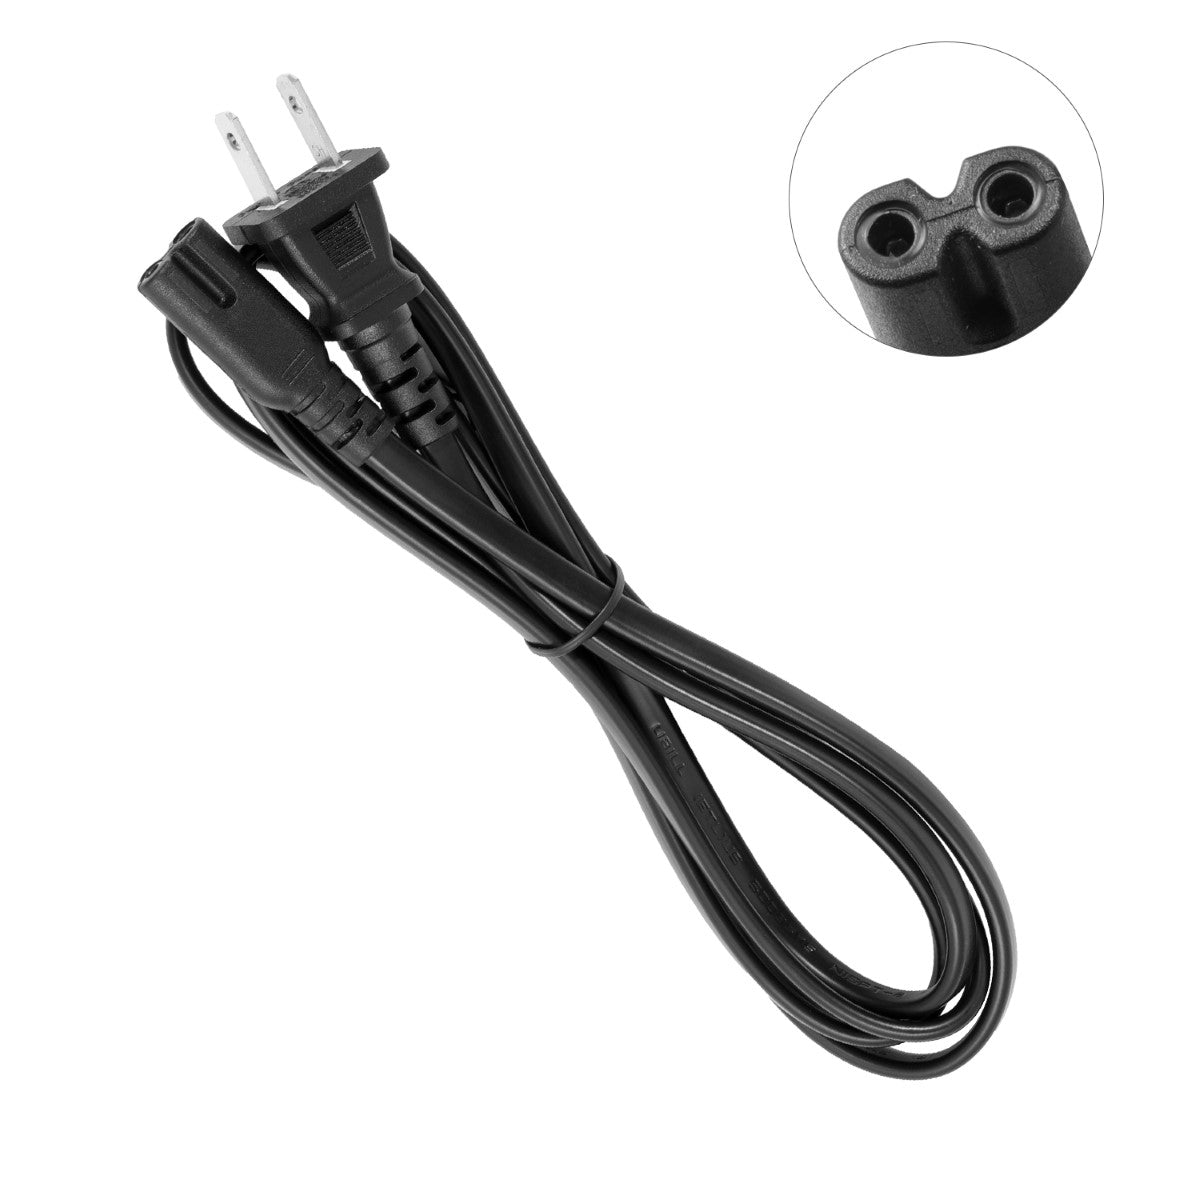 Power Cord for HP ENVY 4501 e-All-in-One Printer.